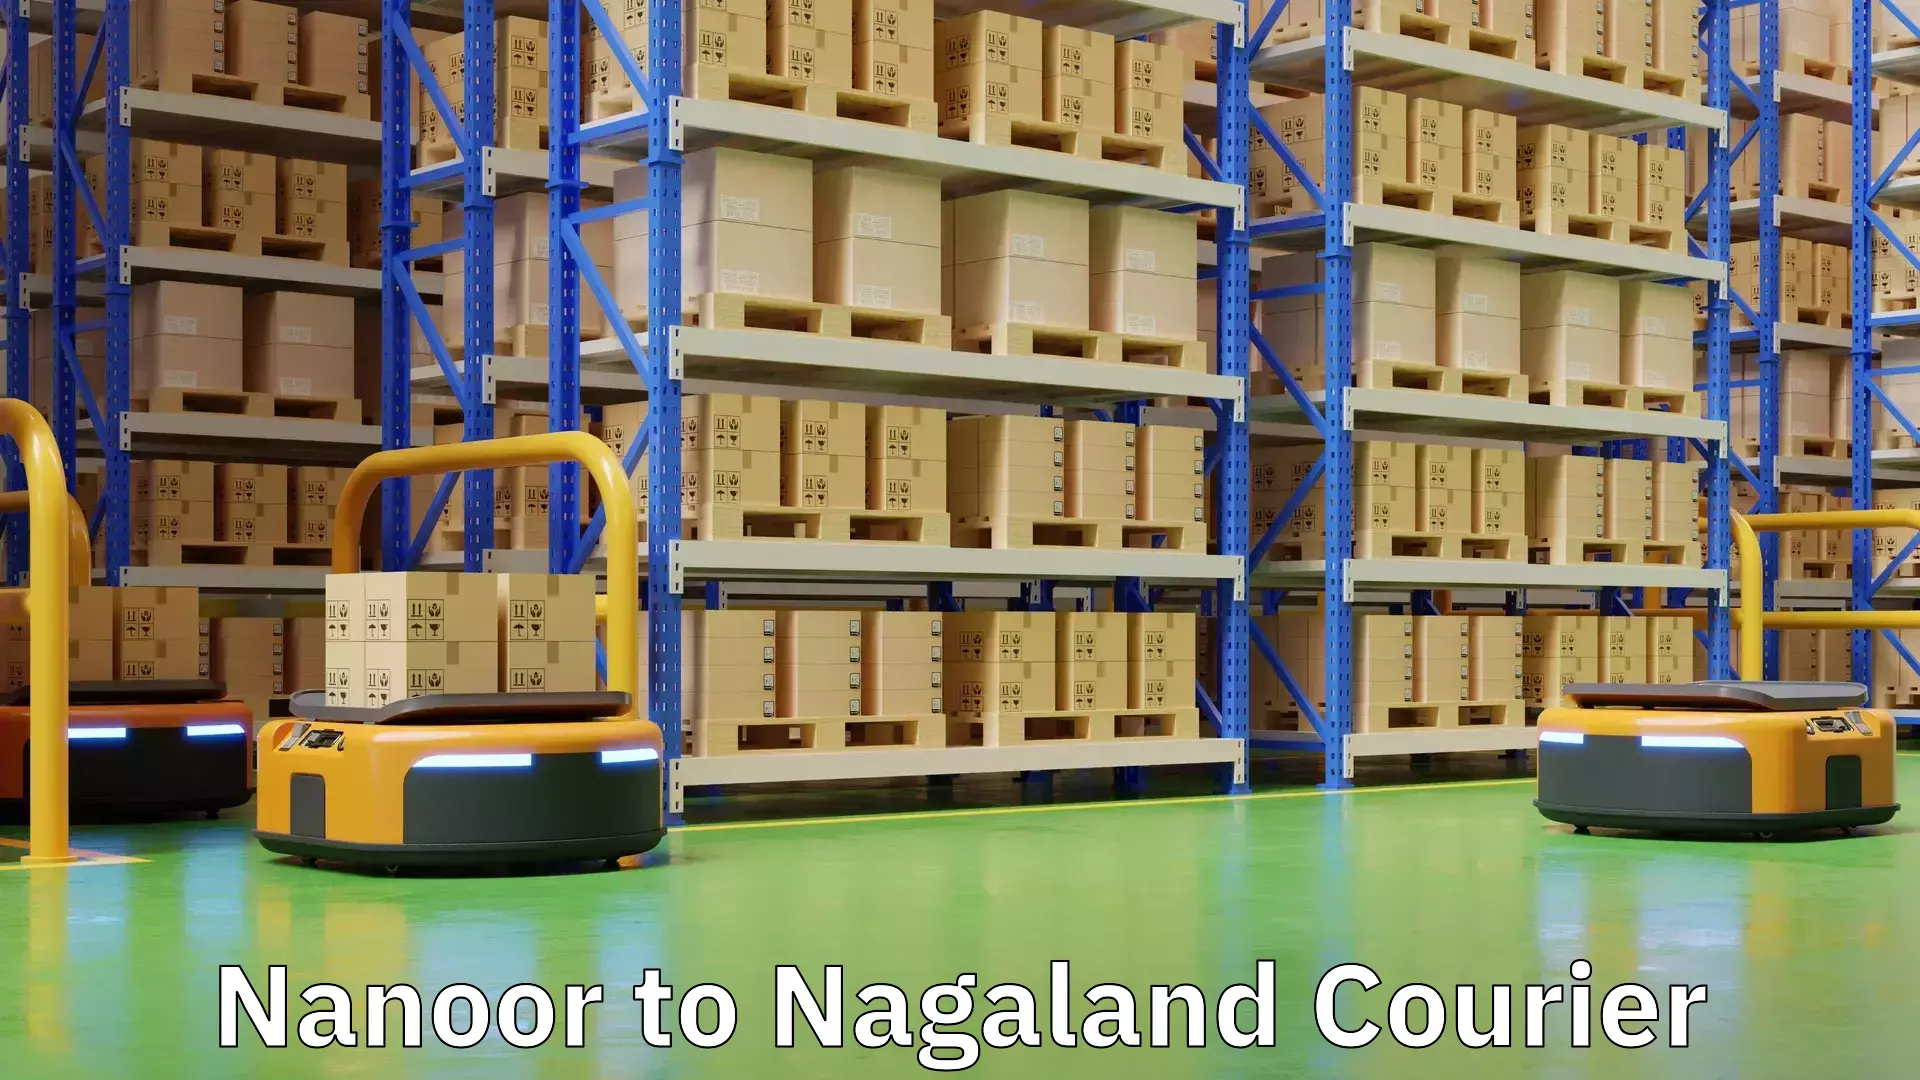 Sustainable delivery practices in Nanoor to Nagaland